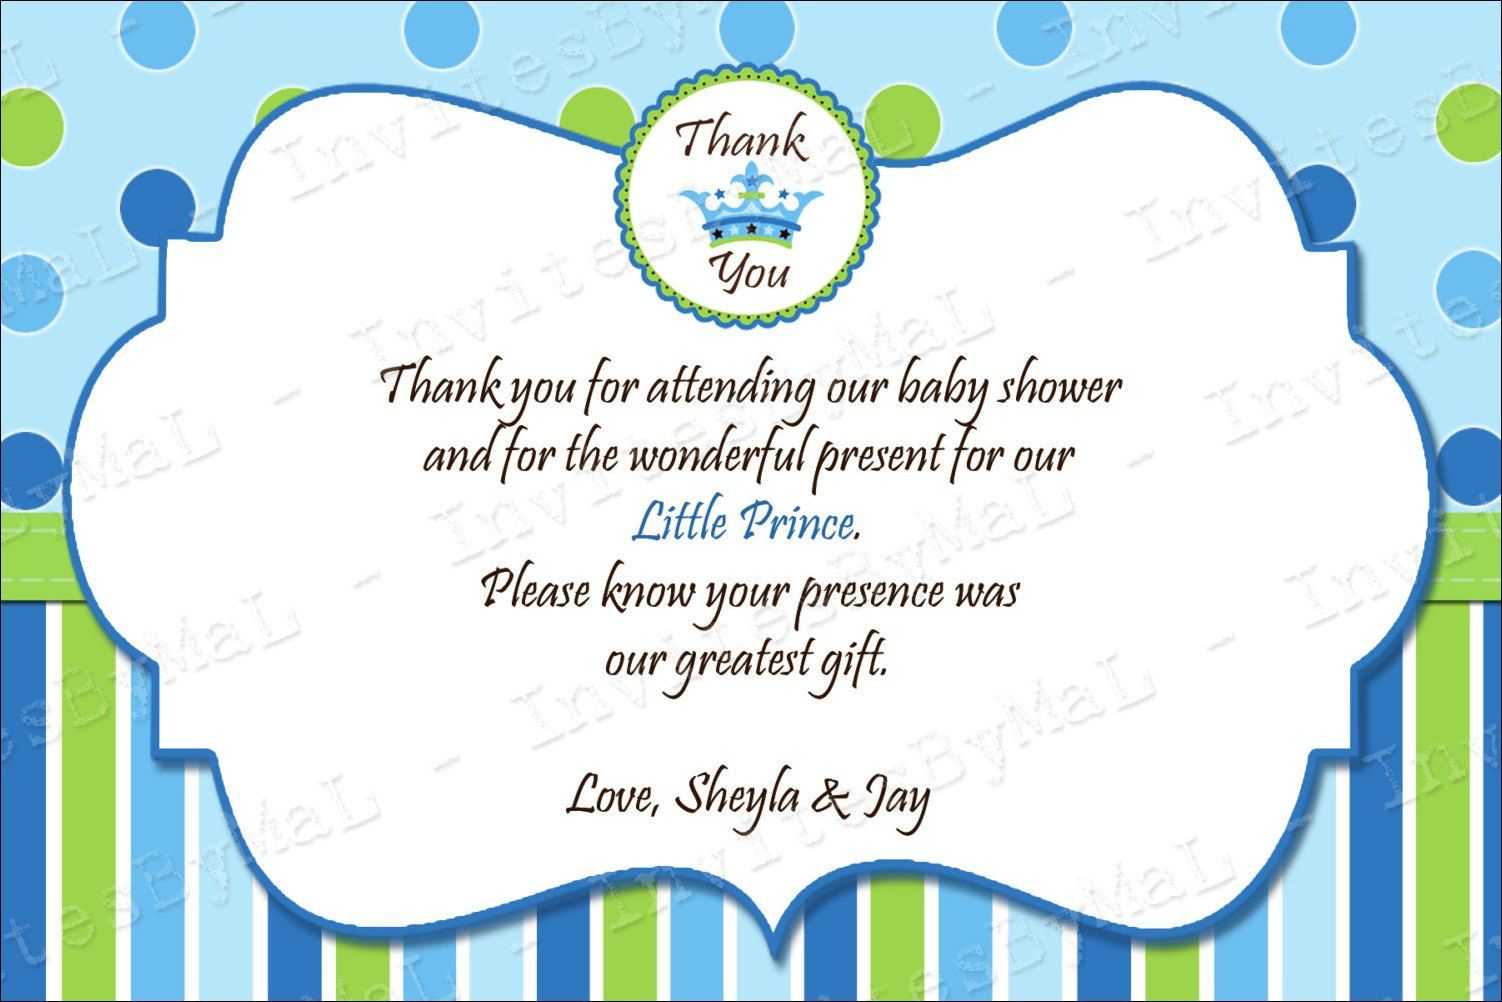 40 Beautiful Baby Shower Thank You Cards Ideas | Baby | Baby Throughout Template For Baby Shower Thank You Cards